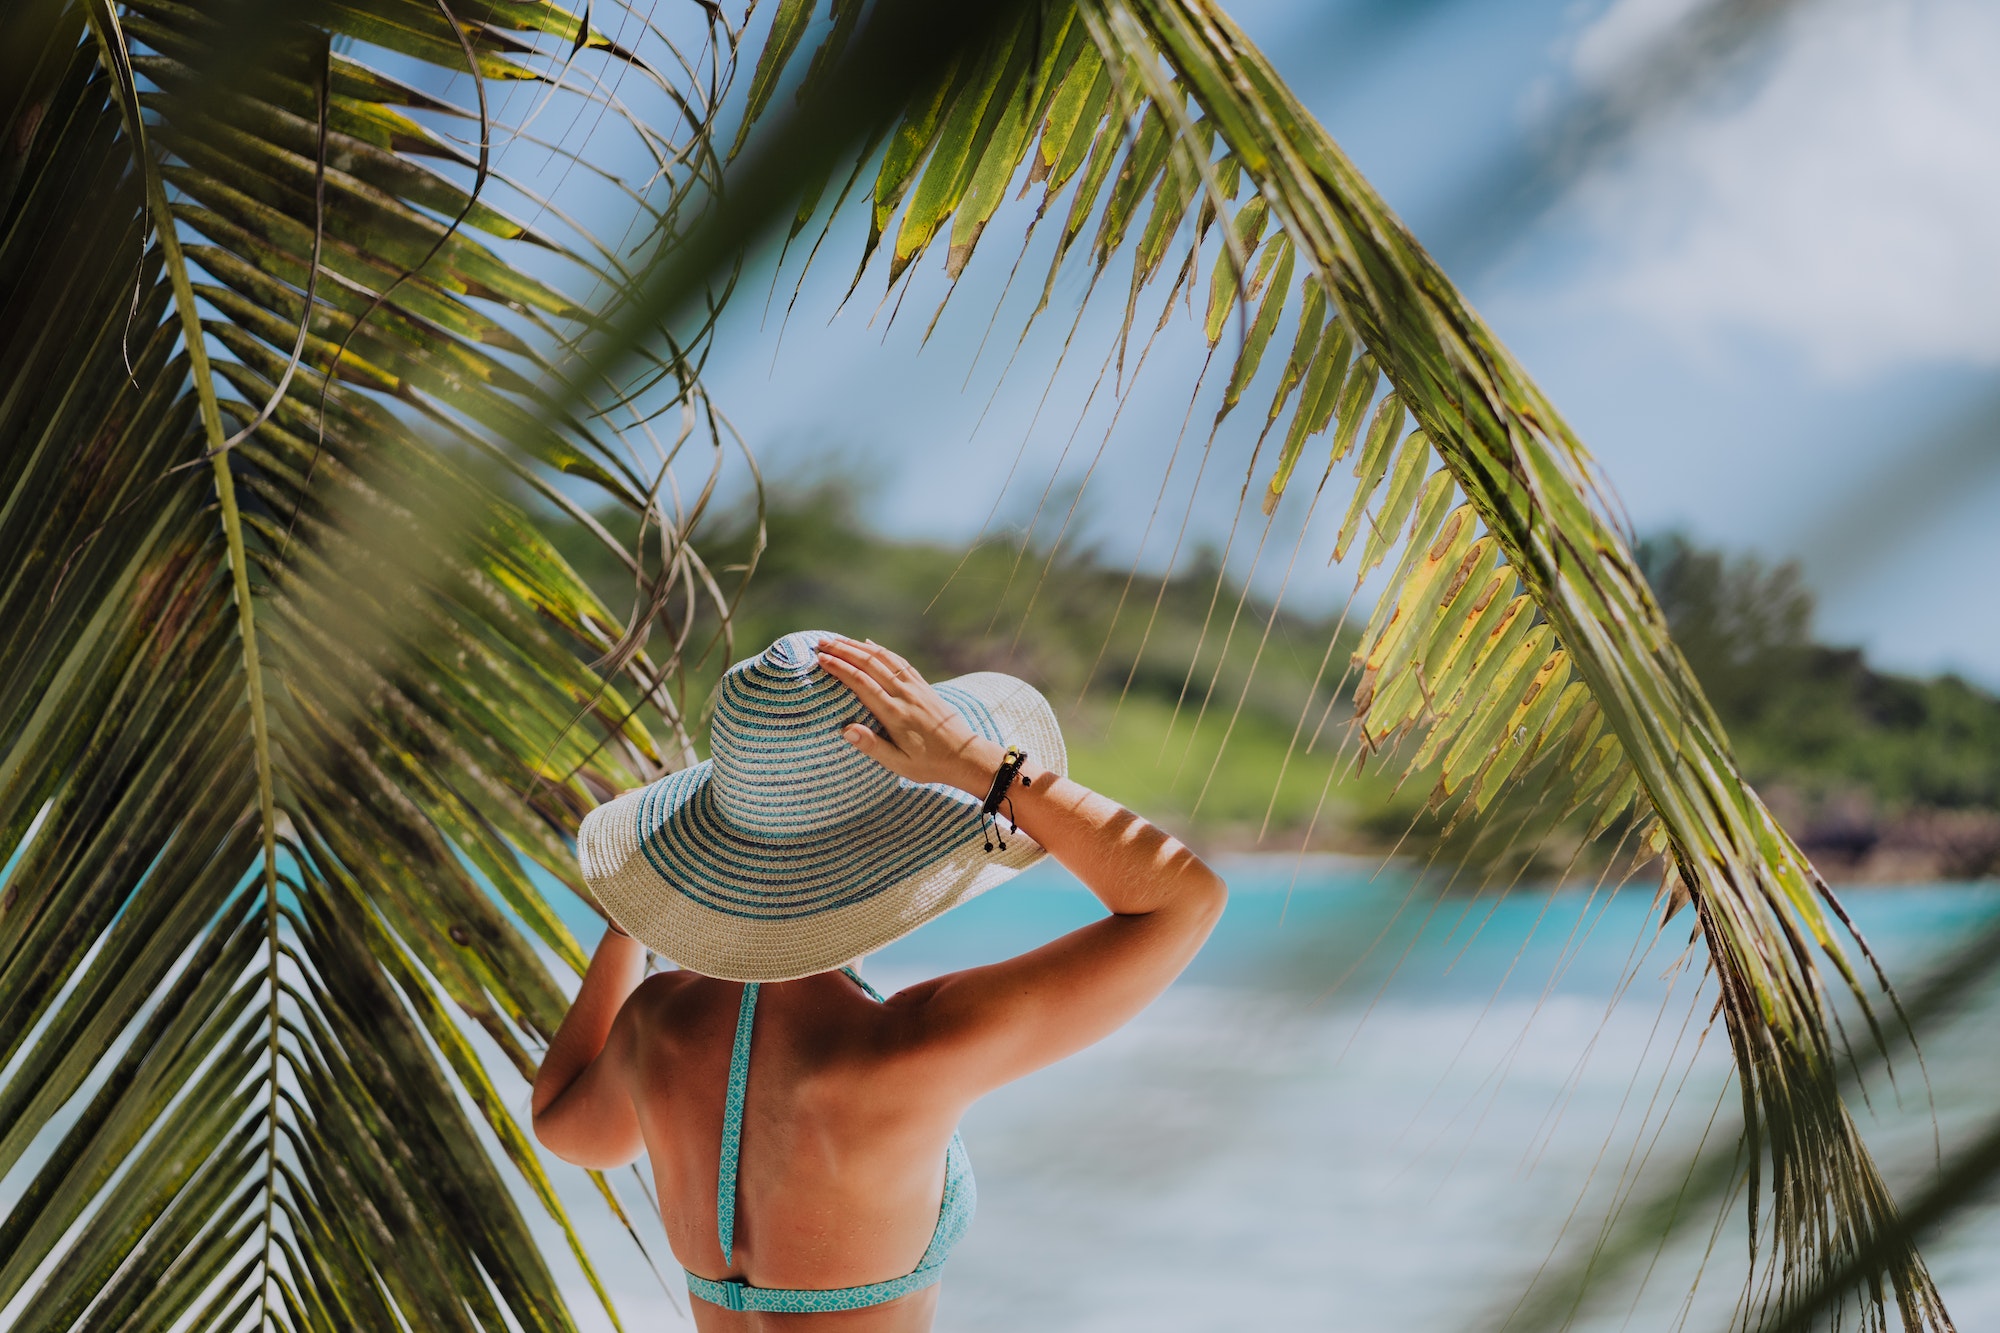 Woman on the beach in the palm trees shadow wearing blue hat. Luxury paradise recreation vacation